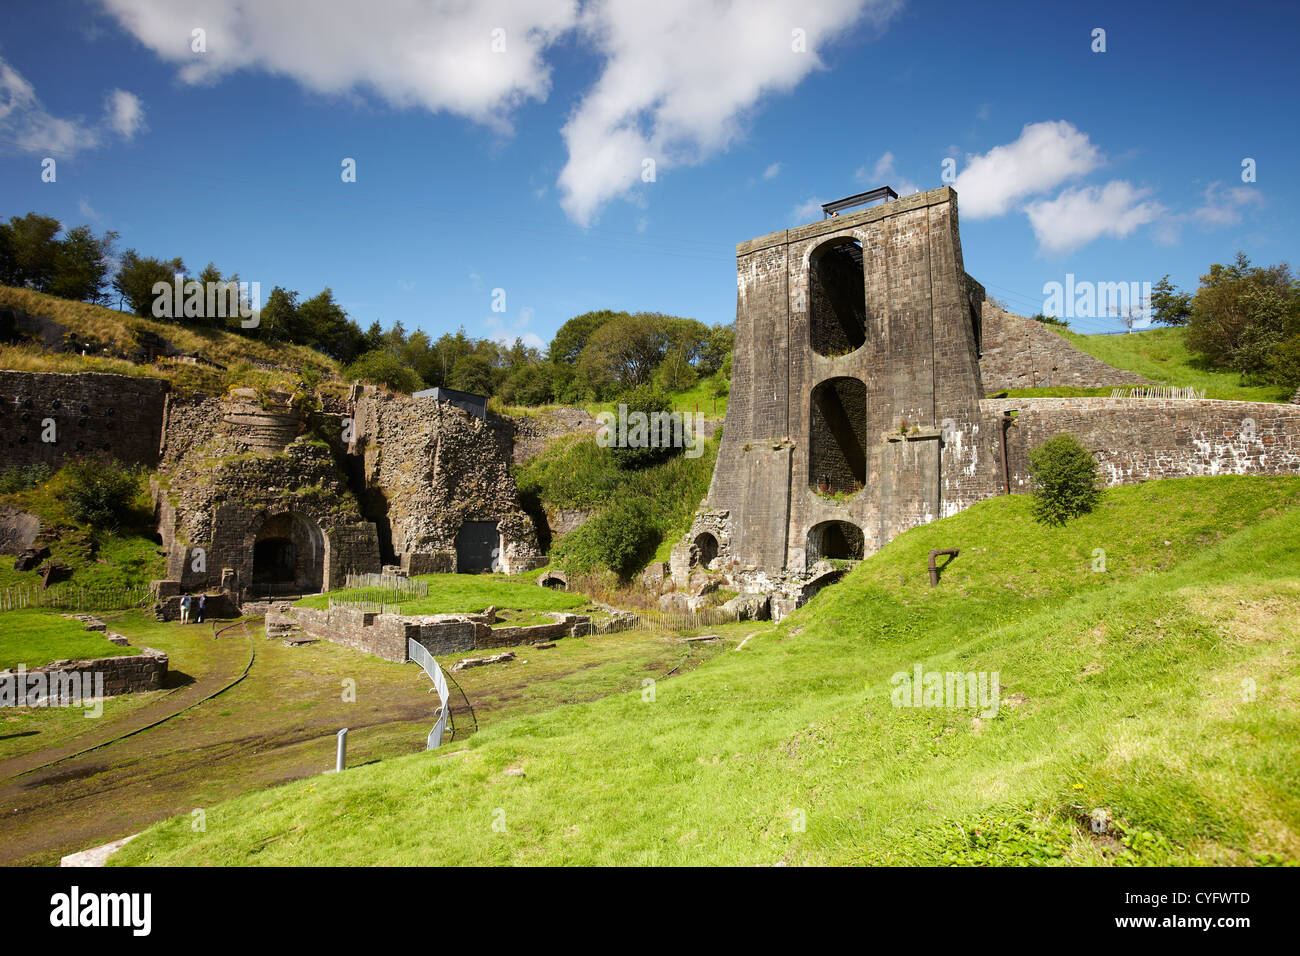 Remains of the furnace and Balance tower, Blaenavon Ironworks museum, Blaenavon, Wales, UK Stock Photo